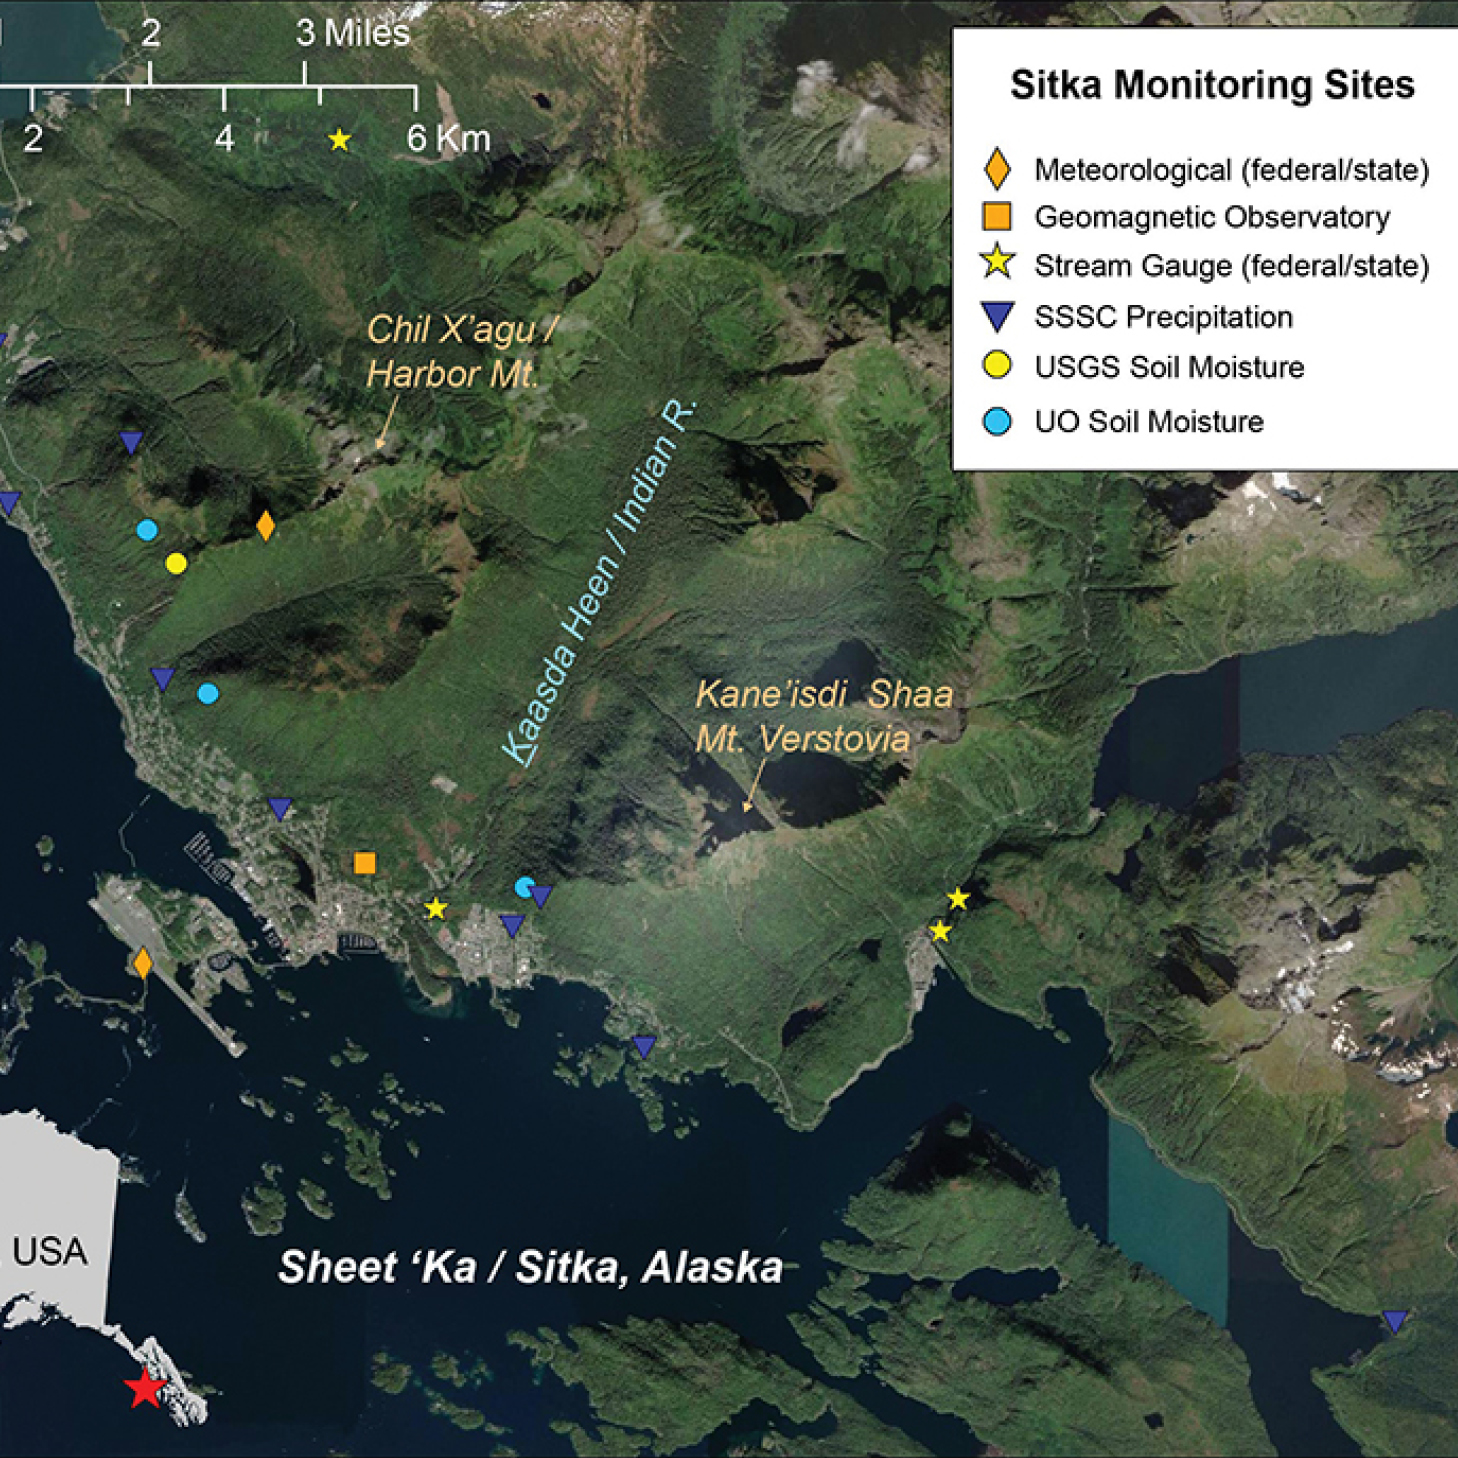 Rainfall and soil hydrology monitoring stations installed around Sitka